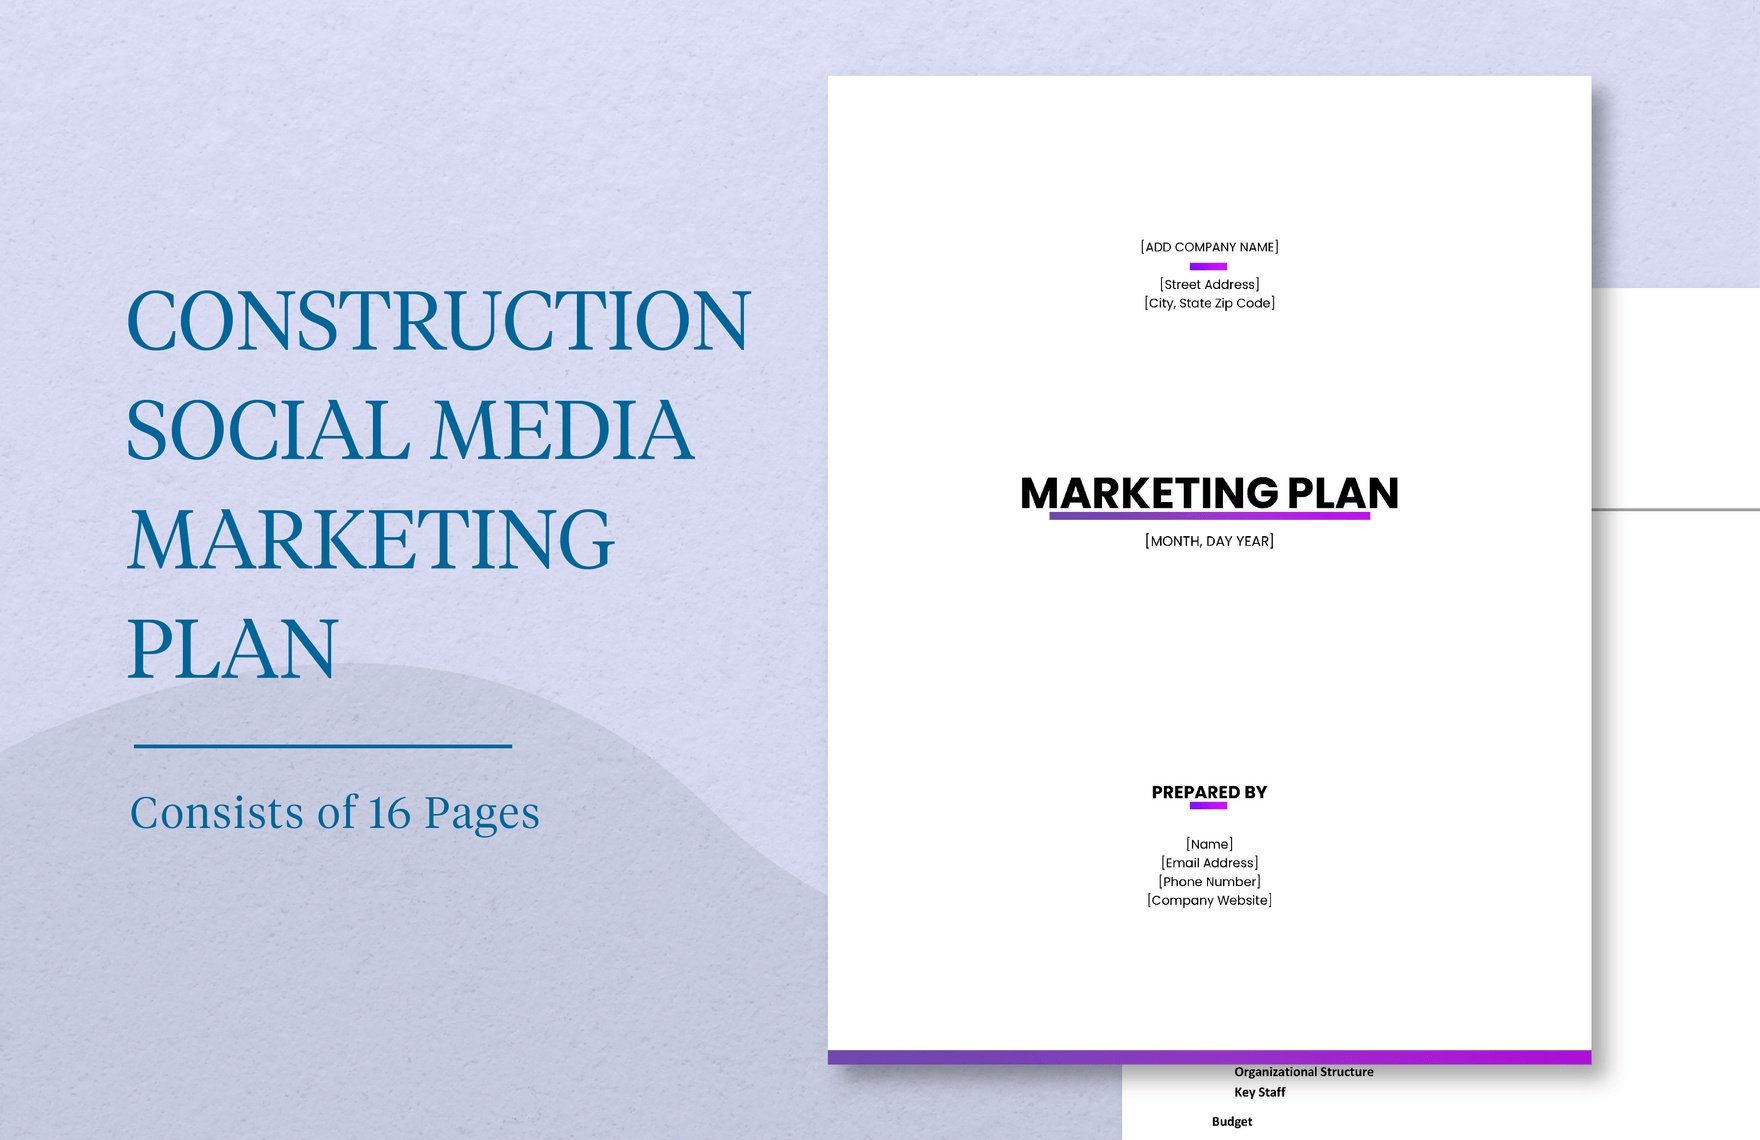 Construction Social Media Marketing Plan Template in Word, Google Docs, Apple Pages